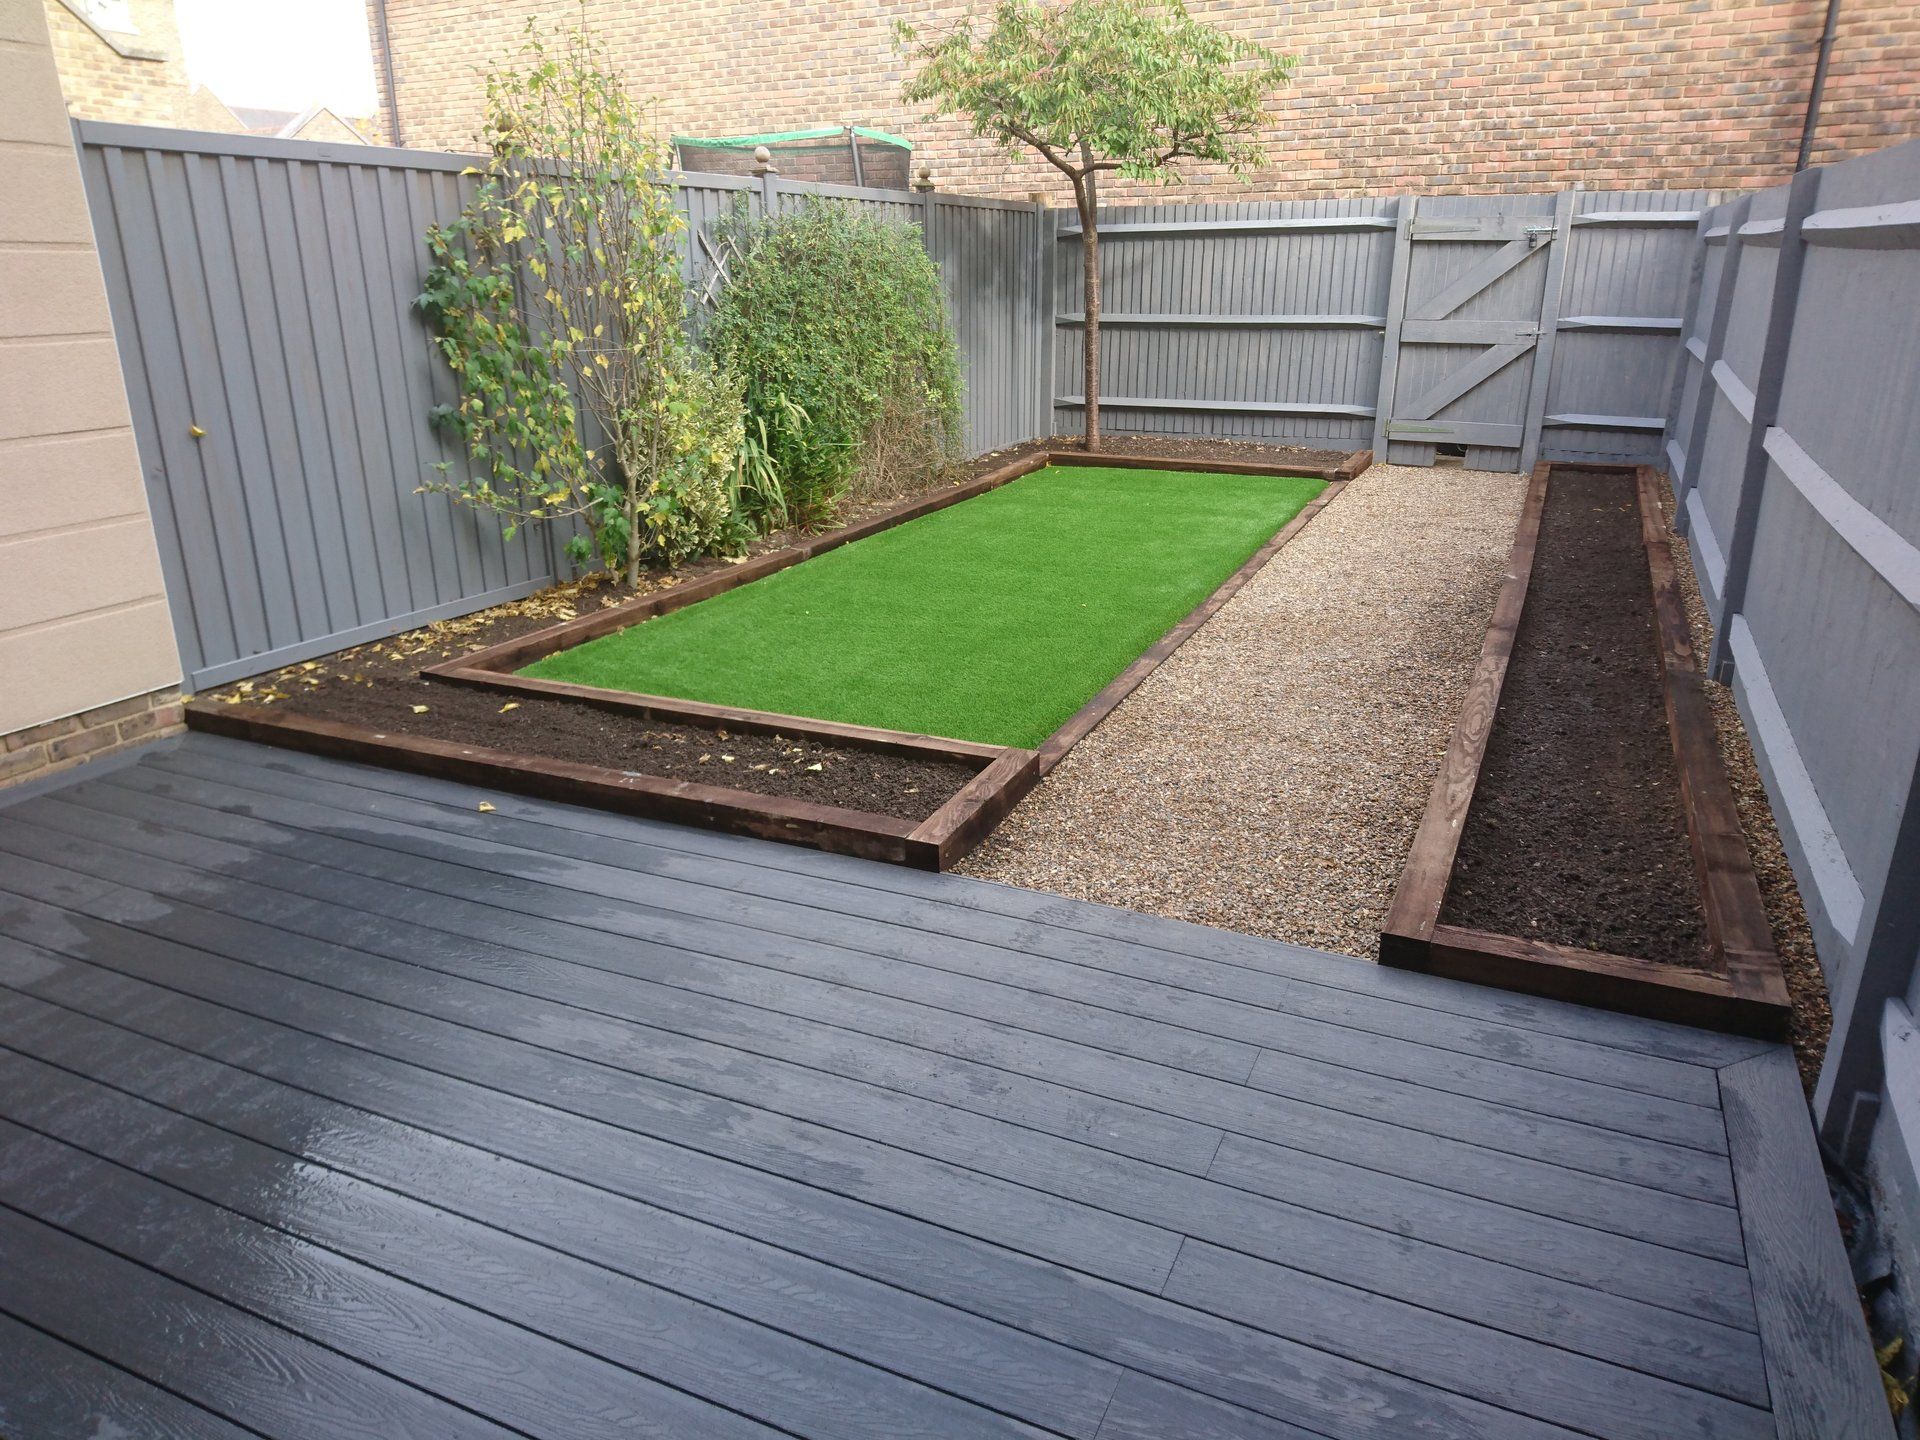 Completed decking installation